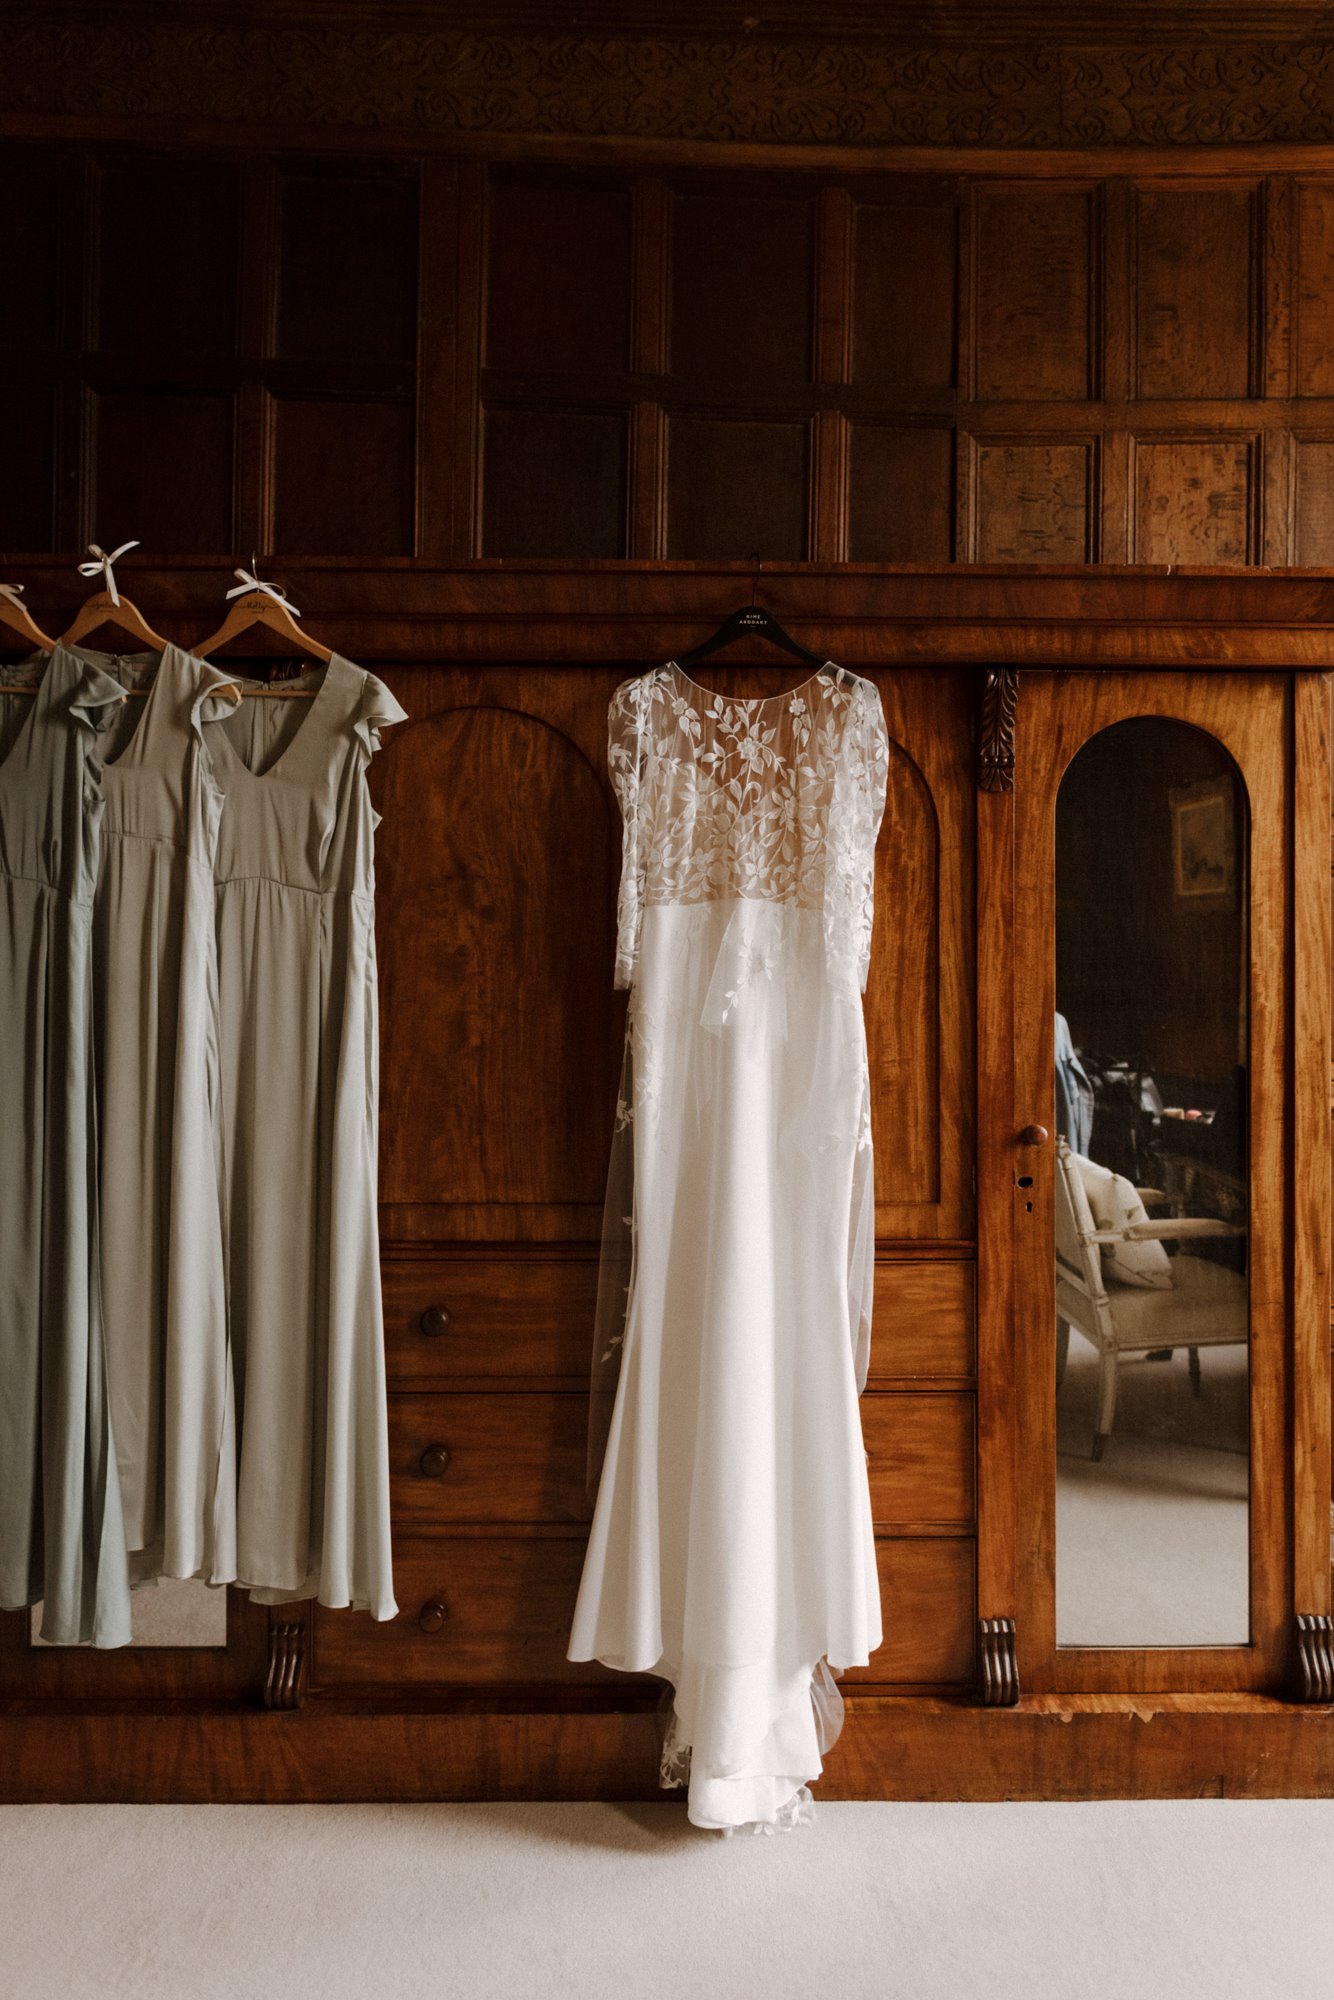 beautiful boho lace dress hanging in gorgeous wood panelled room in stately home